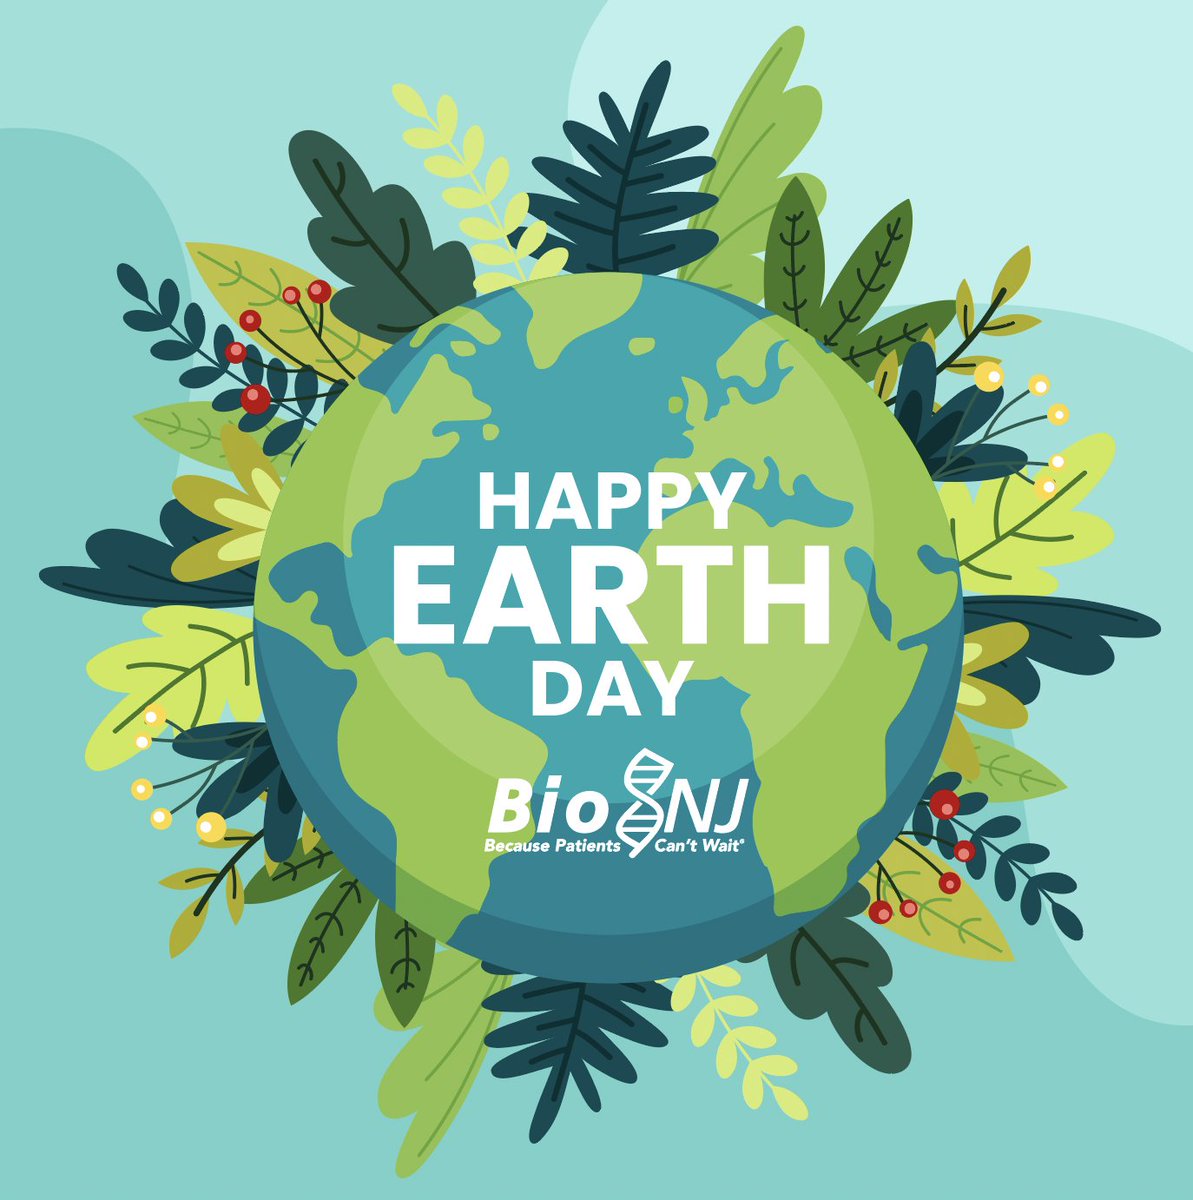 Happy Earth Day from #BioNJ! Let's collaborate to promote sustainable biotechnologies that nurture, nourish and power the world responsibly. #EarthDay #EarthDayEveryDay #EcoFriendly #SustainableLiving #ProtectOurPlanet